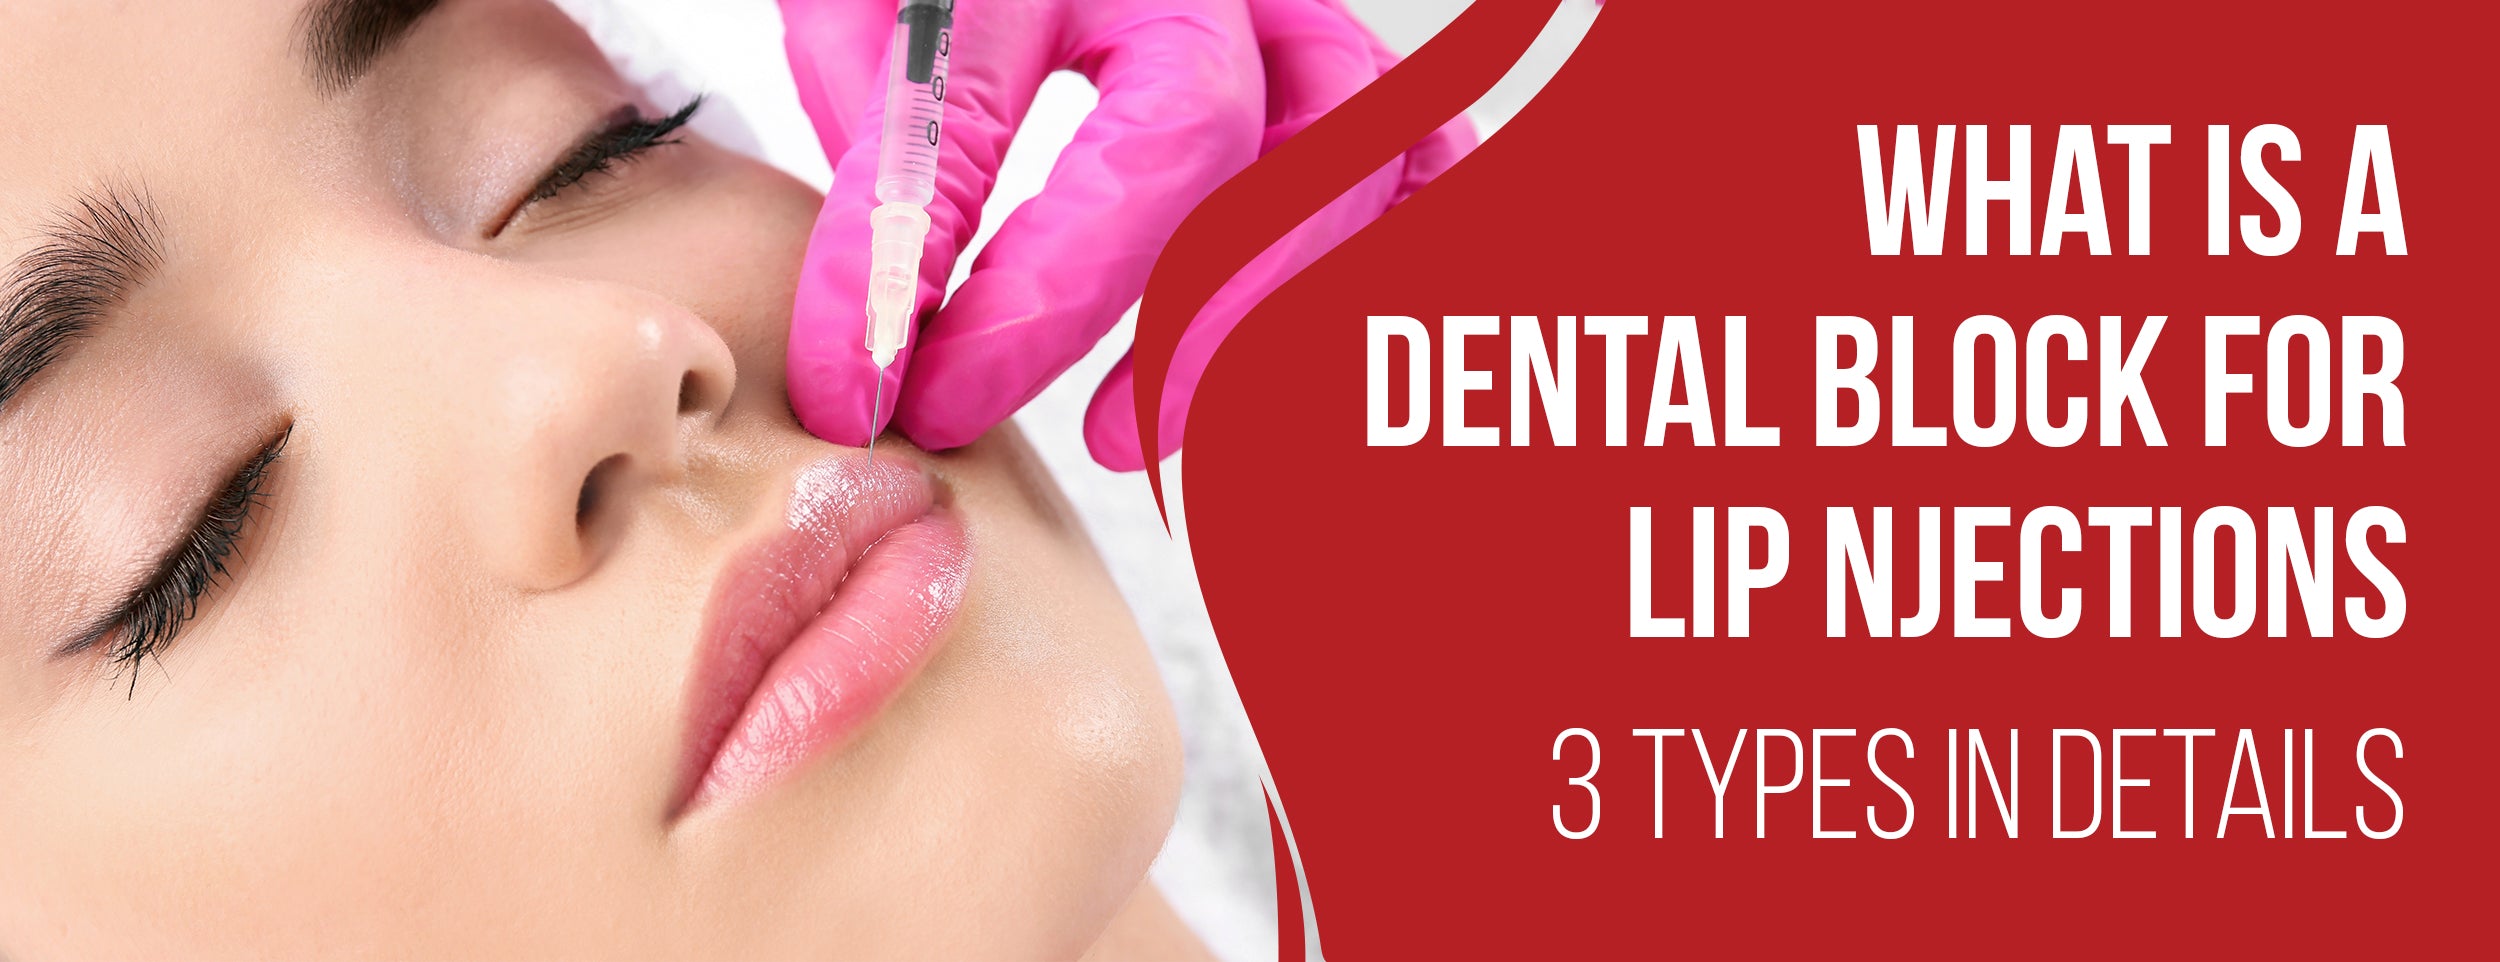 A Dental Block for Lip Injections: 3 Types & Effects